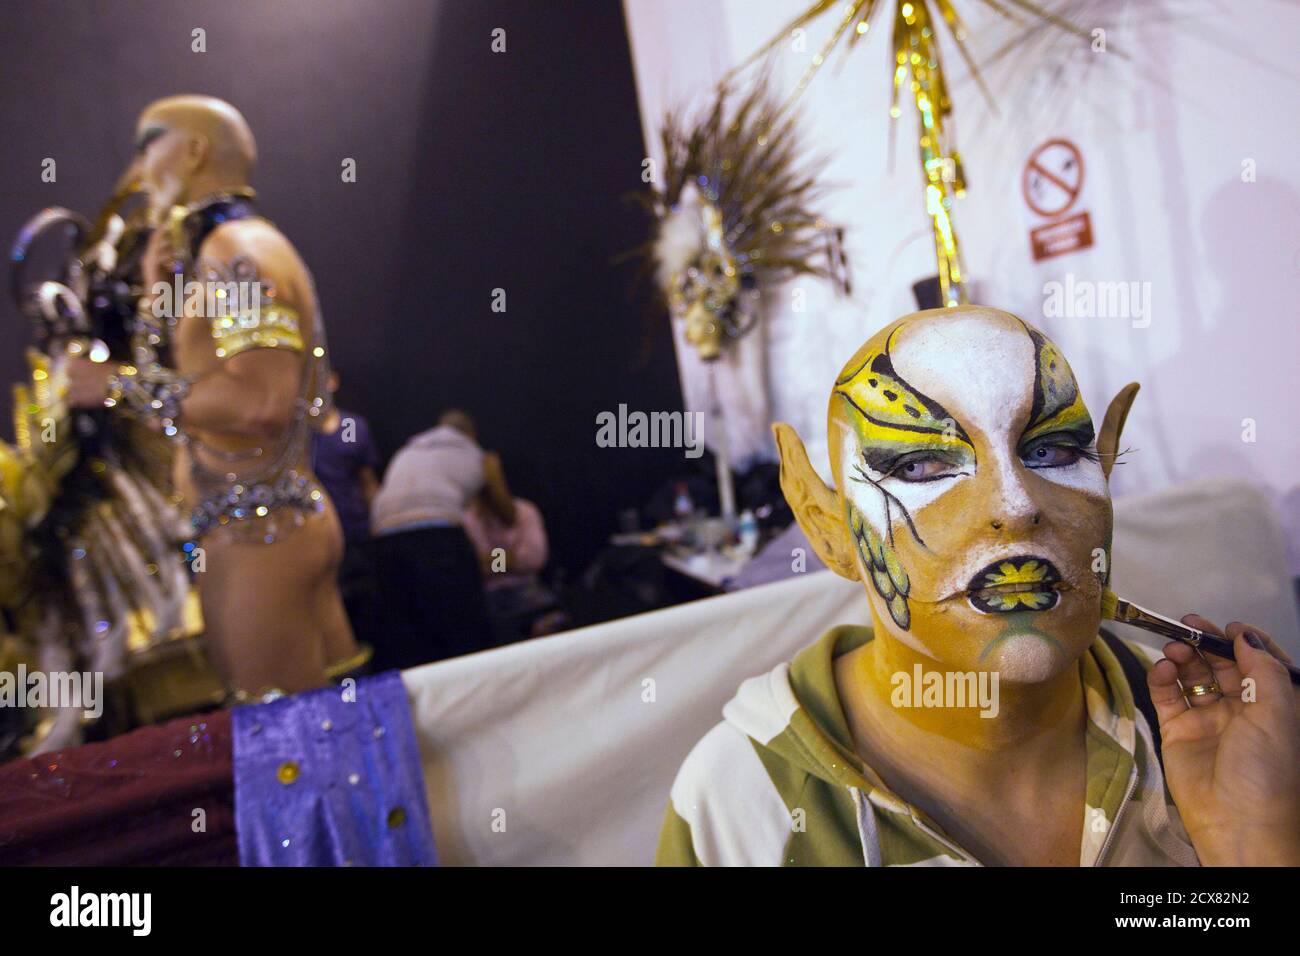 Participant Anemona (R) prepares to perform at a drag queen competition during carnival festivities in Las Palmas on the Spanish Canary Island of Gran Canaria, late March 4, 2011. Picture taken March 4, 2011. REUTERS/Borja Suarez (SPAIN - Tags: SOCIETY) Stock Photo